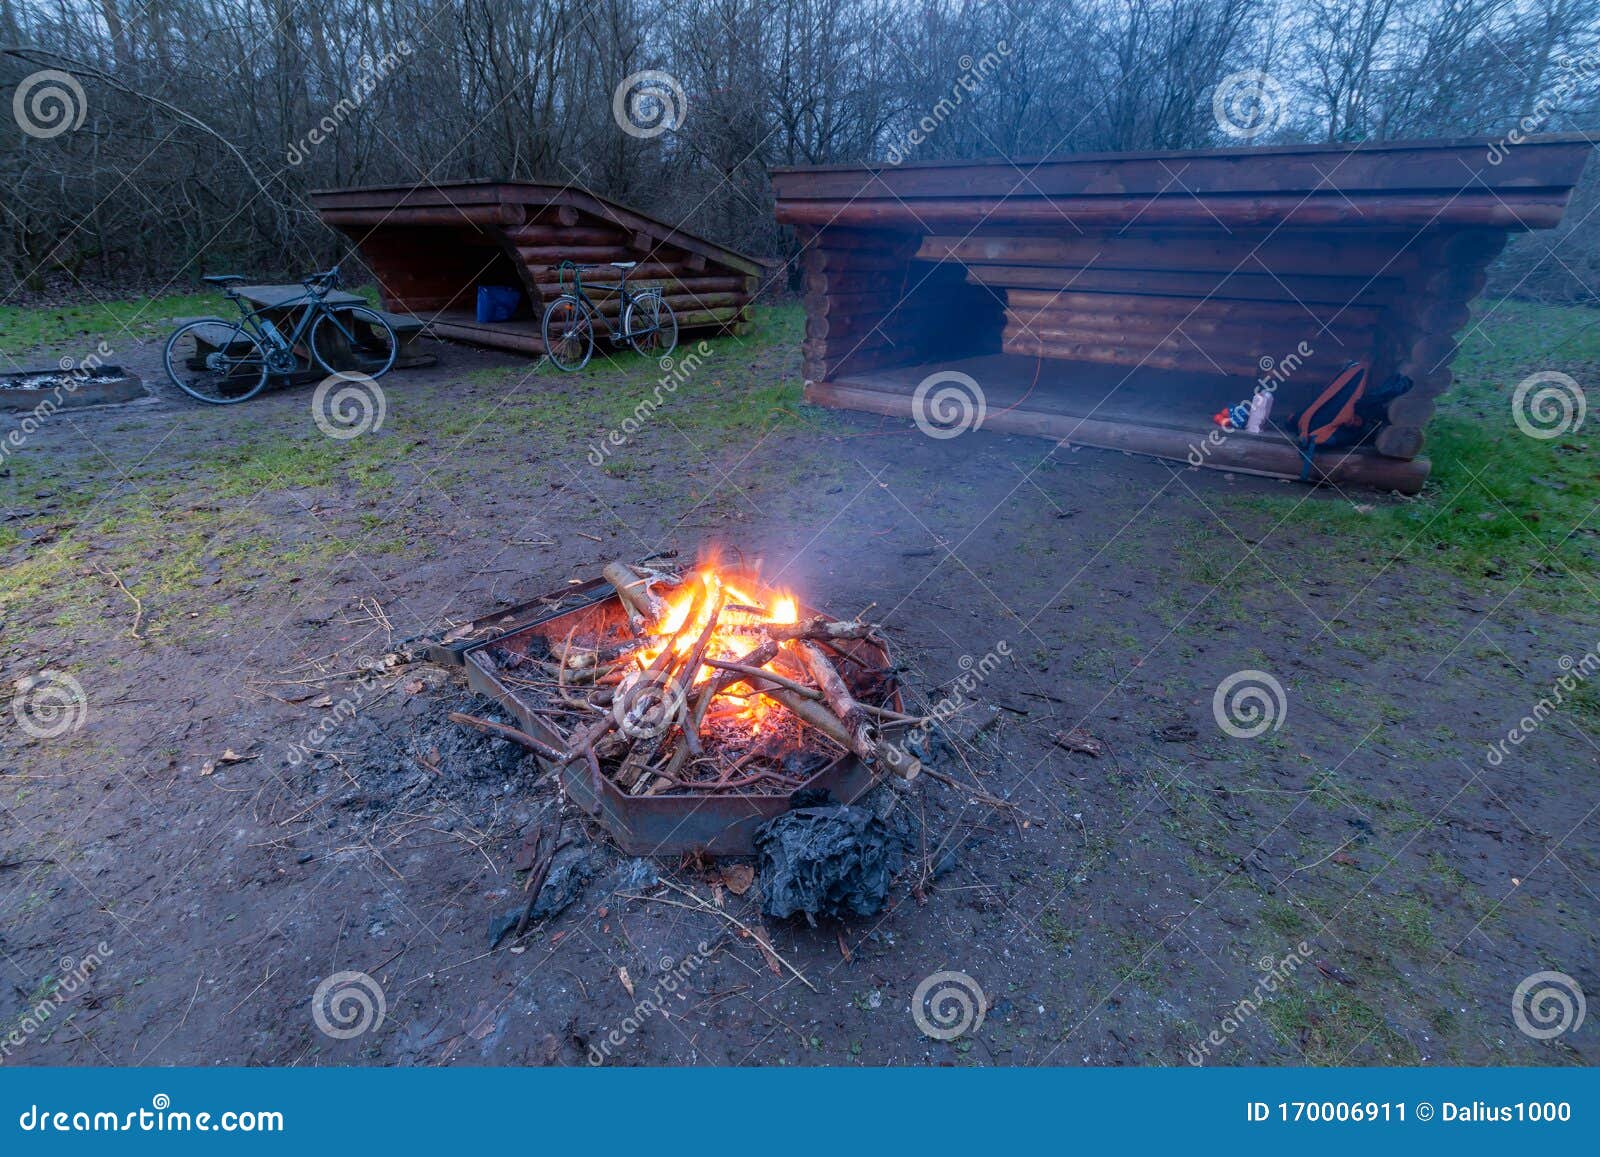 Public Camping Shelter Nature Outside the Forest. Stock - Image of cottage, fire: 170006911